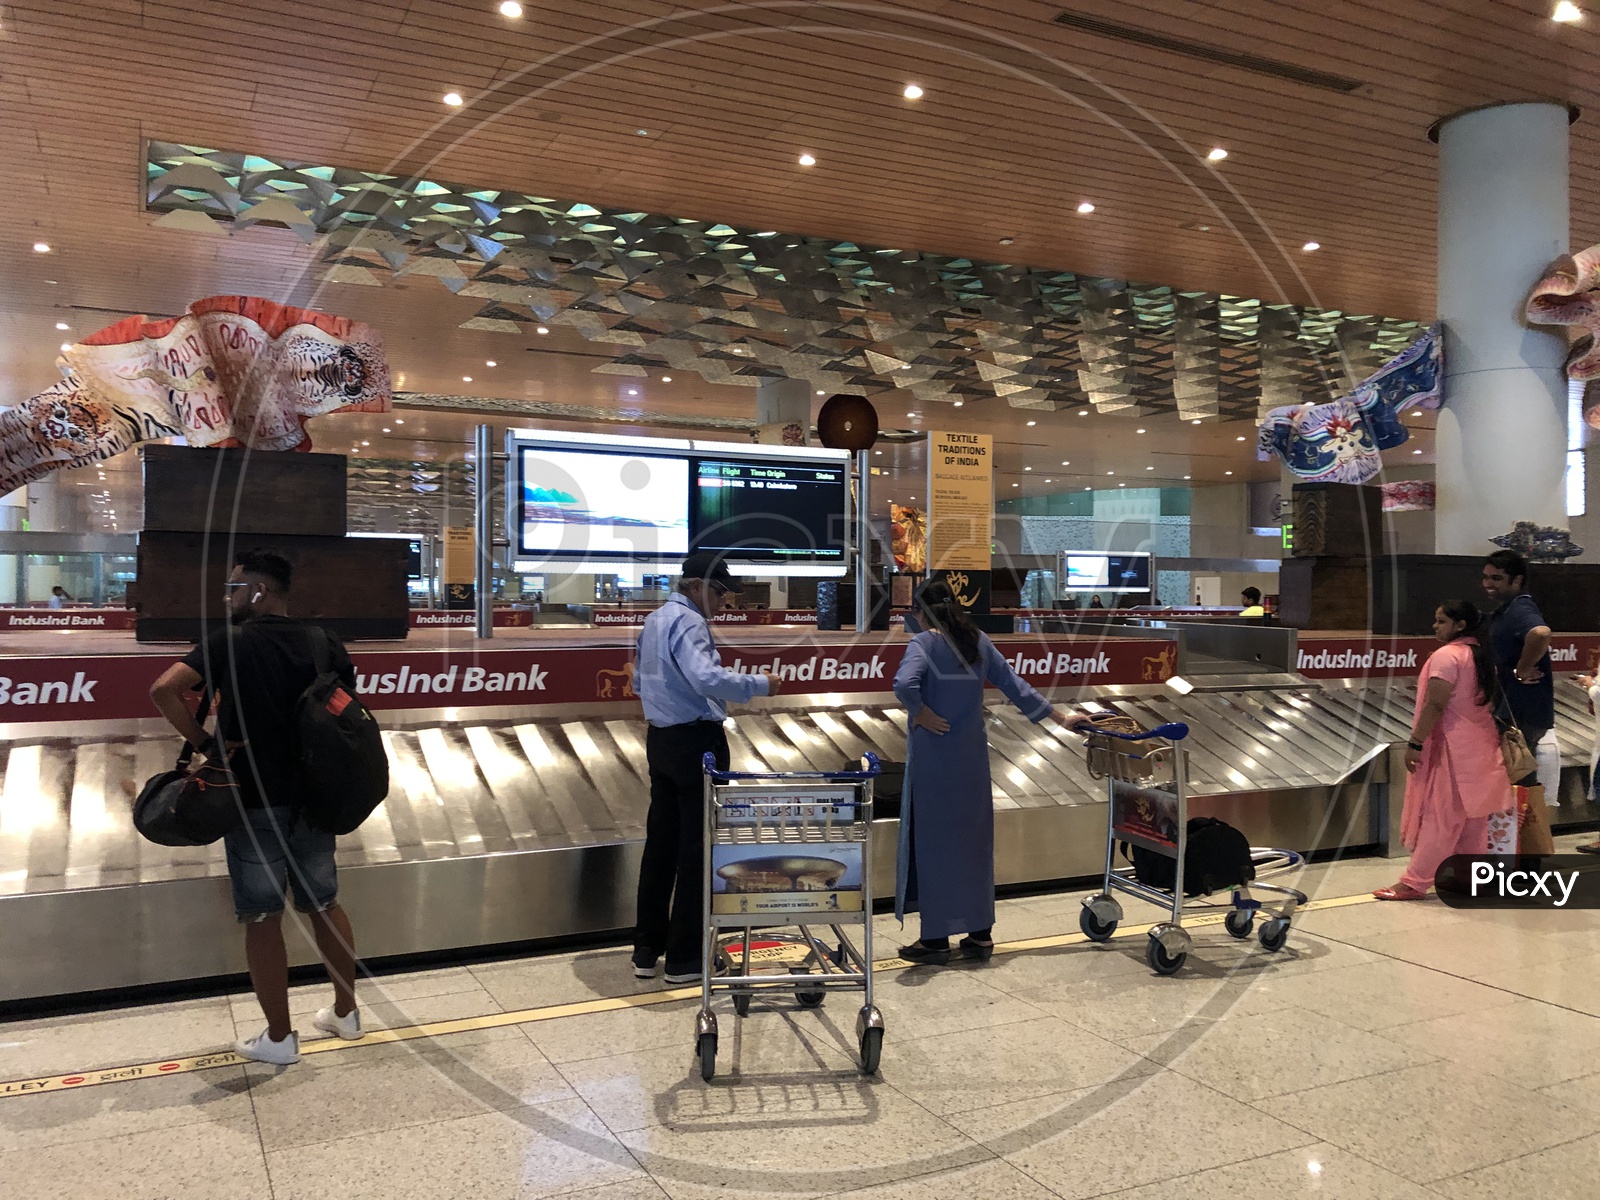 Airport Luggage Belt or Conveyor belt With Passengers Collecting Luggage Bags